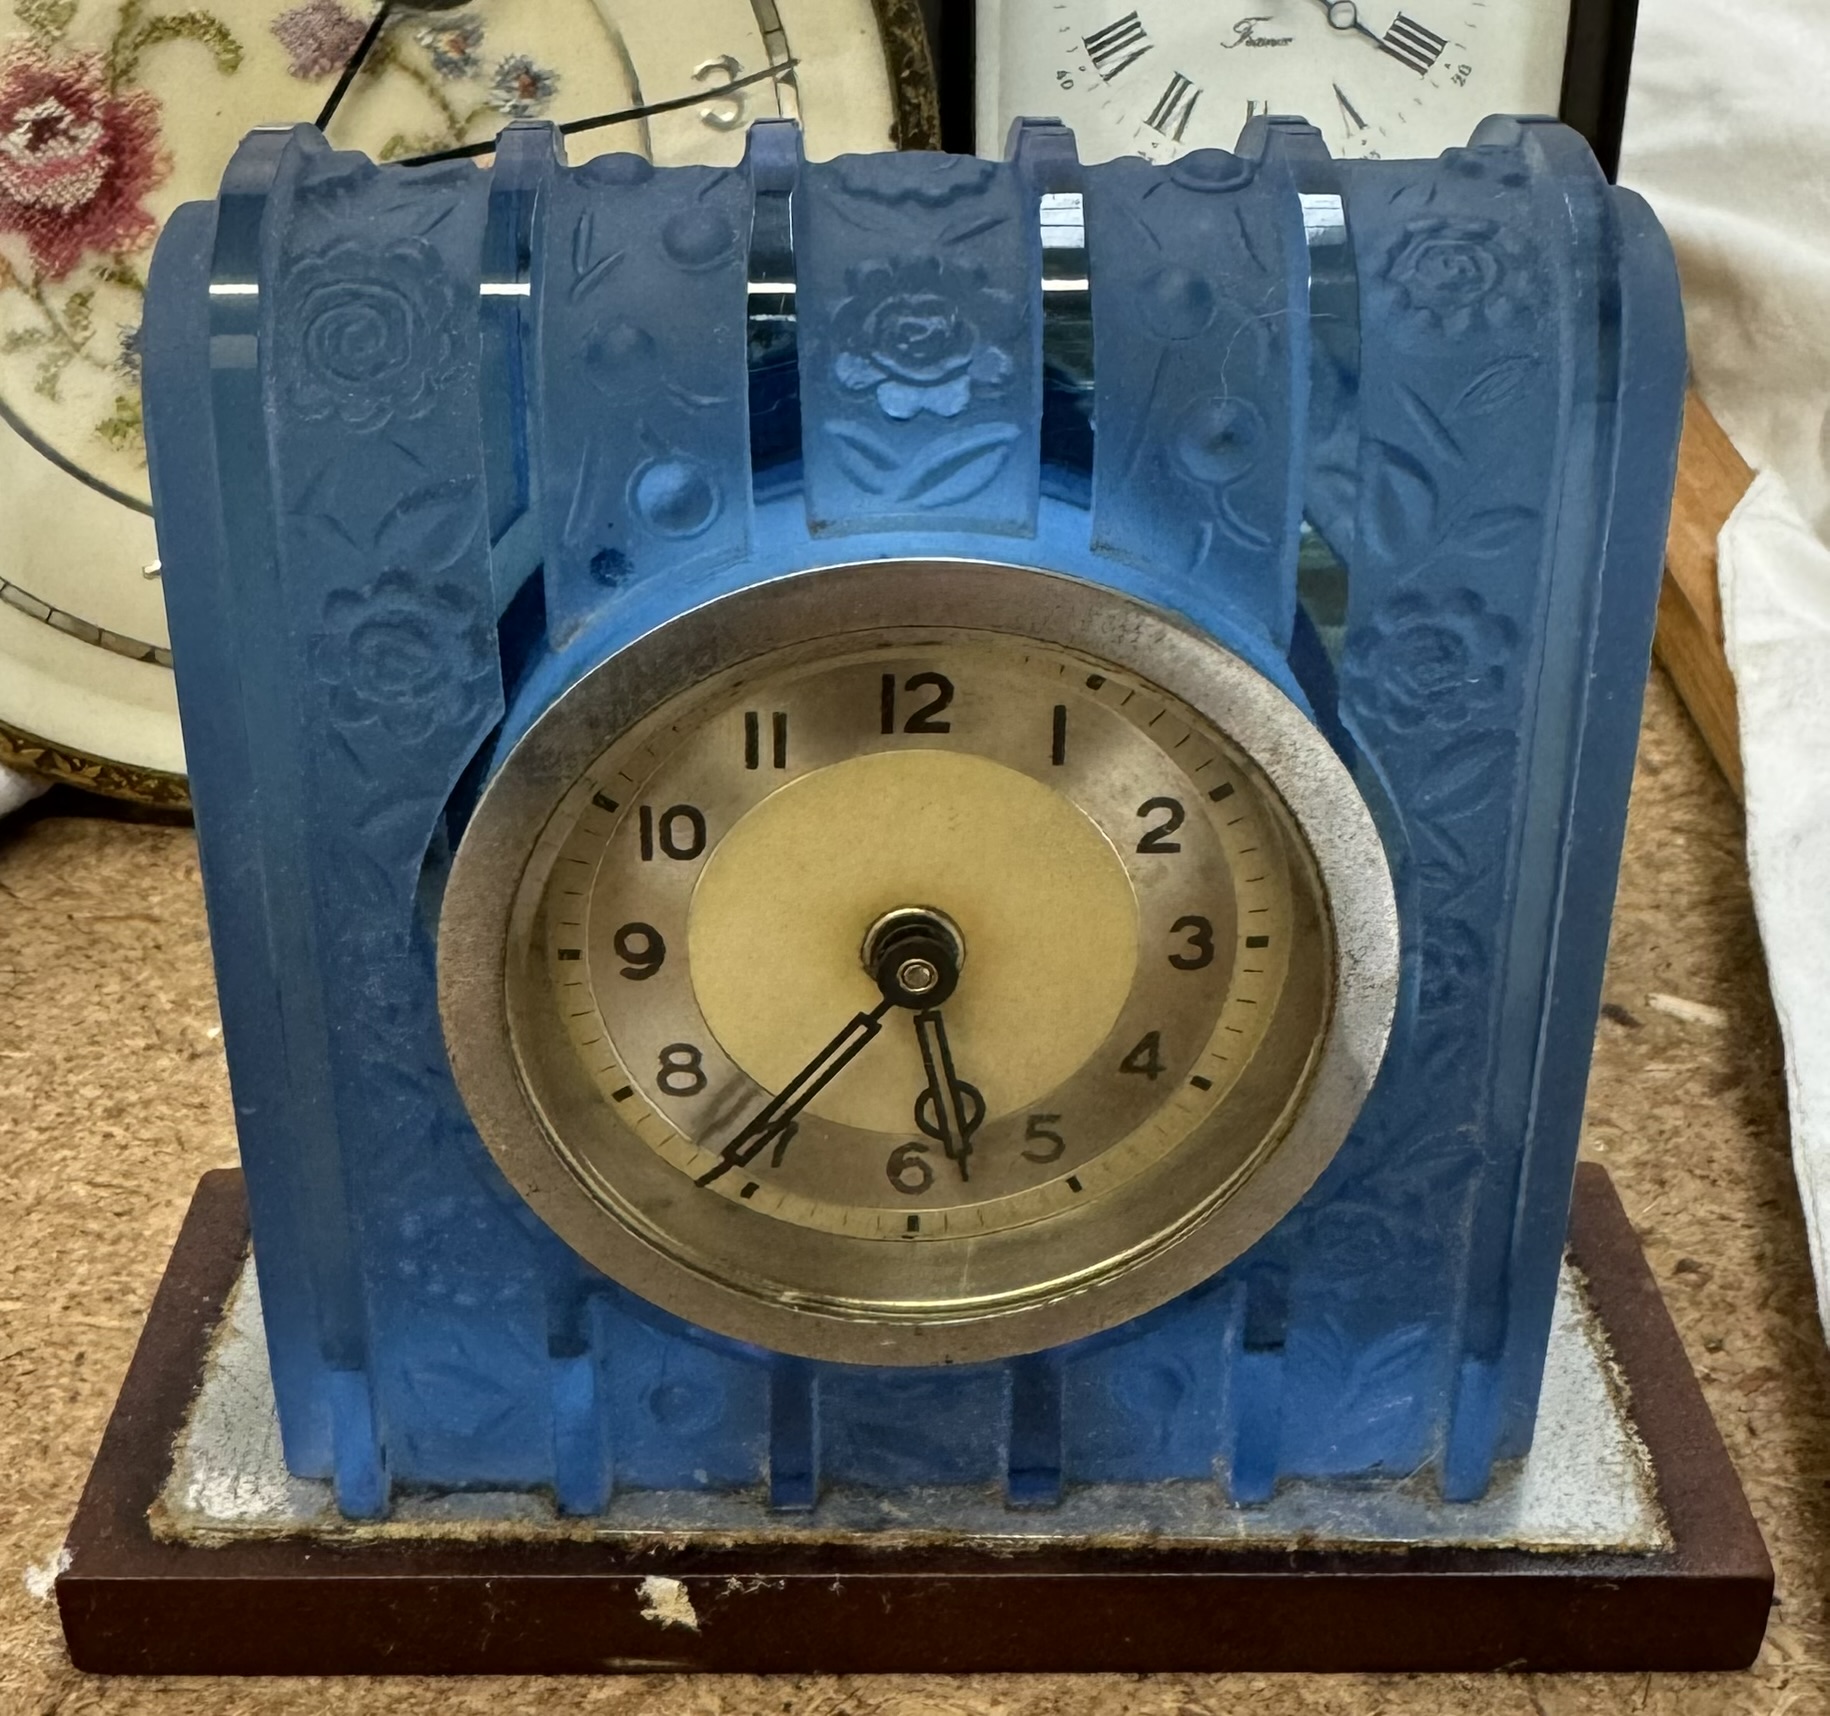 A Rapport of France brass carriage clock, - Image 2 of 3